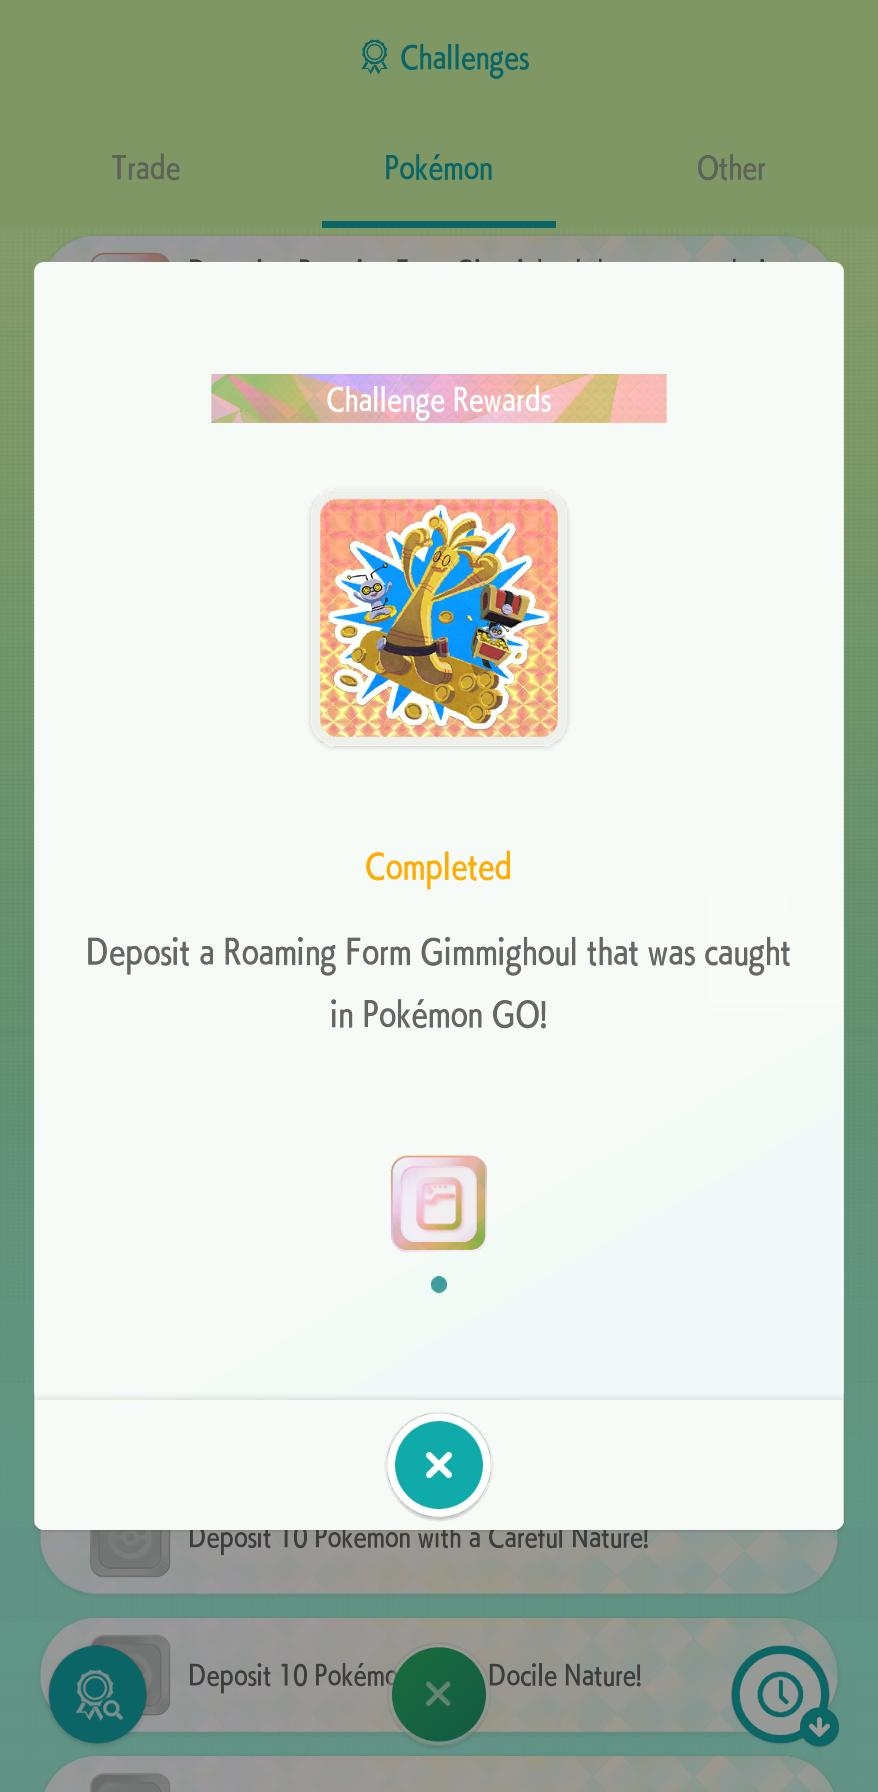 Completed challenge and sticker reward in Pokémon HOME mobile